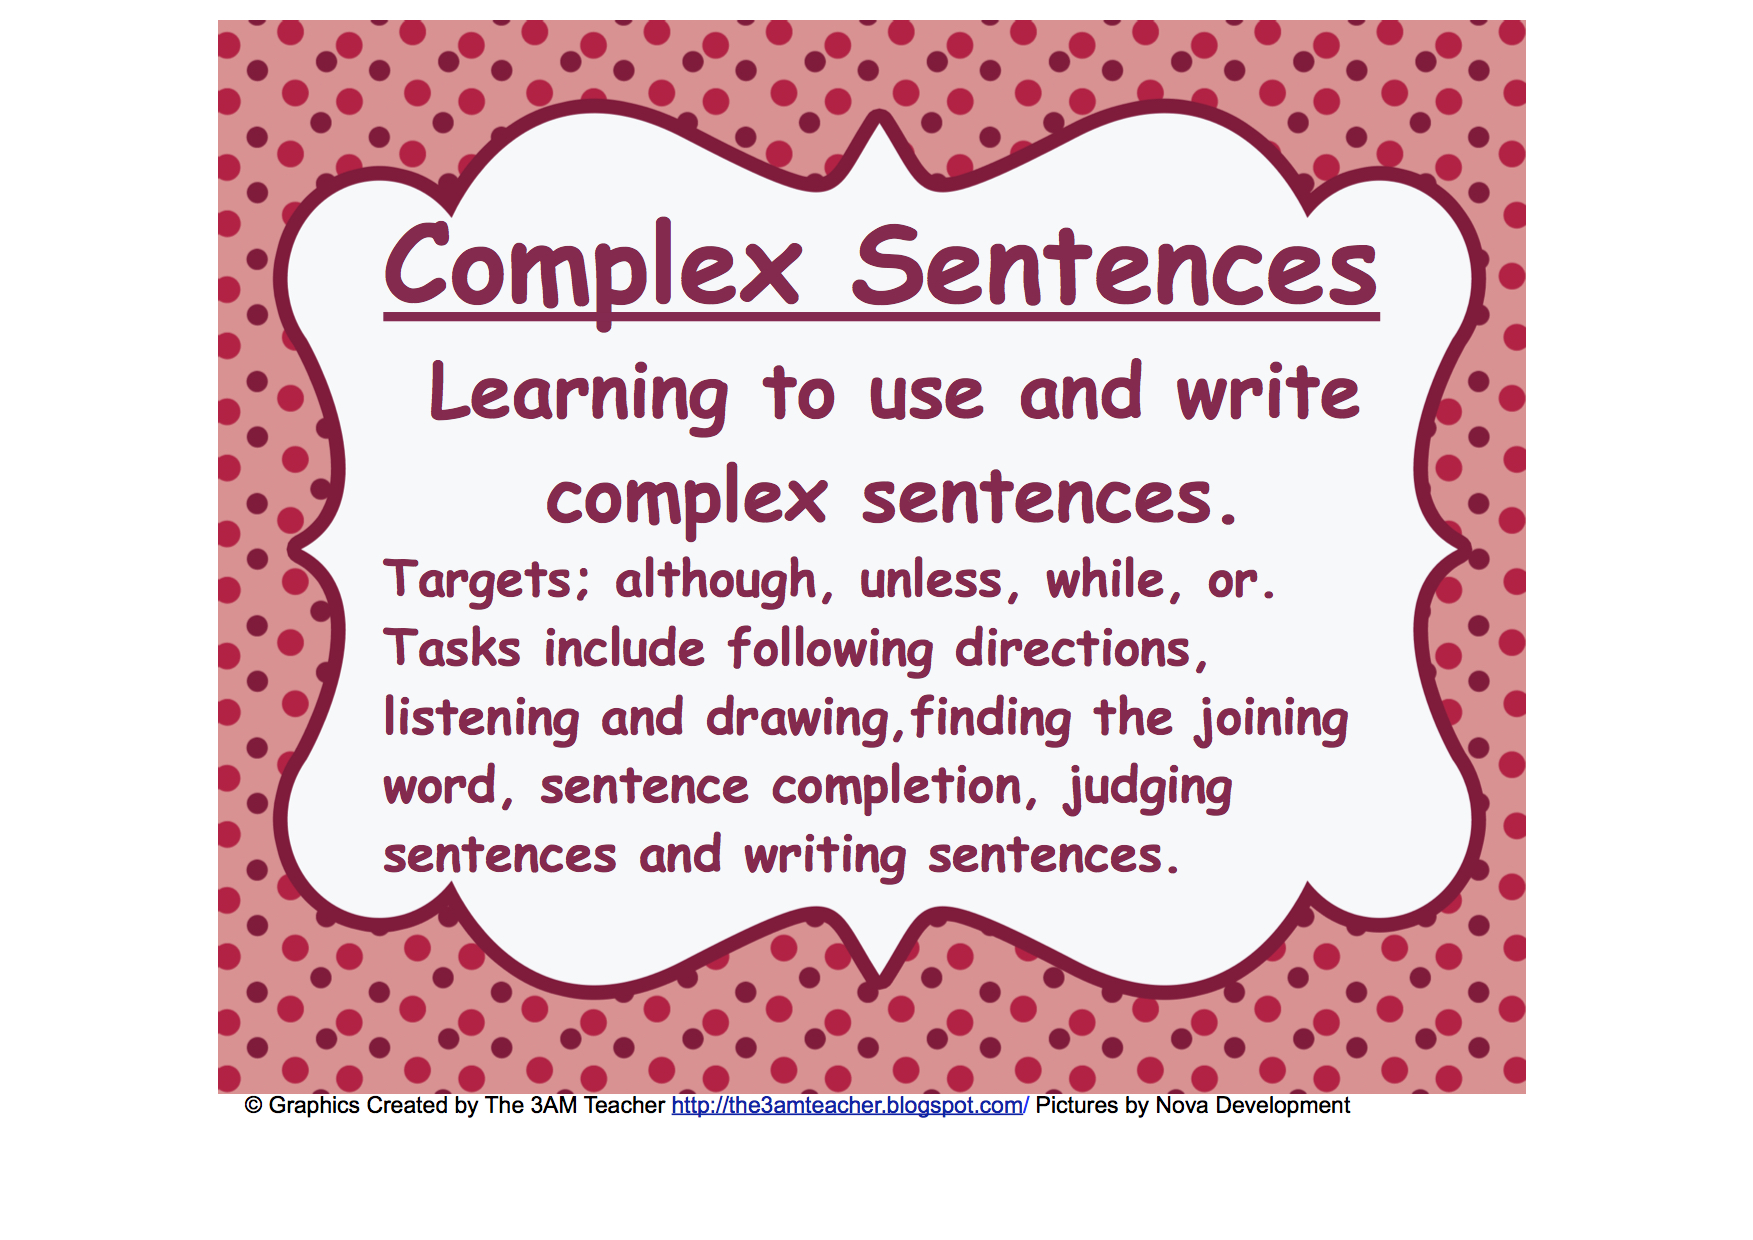 Understanding and Writing Complex Sentences - while, although, or and unless